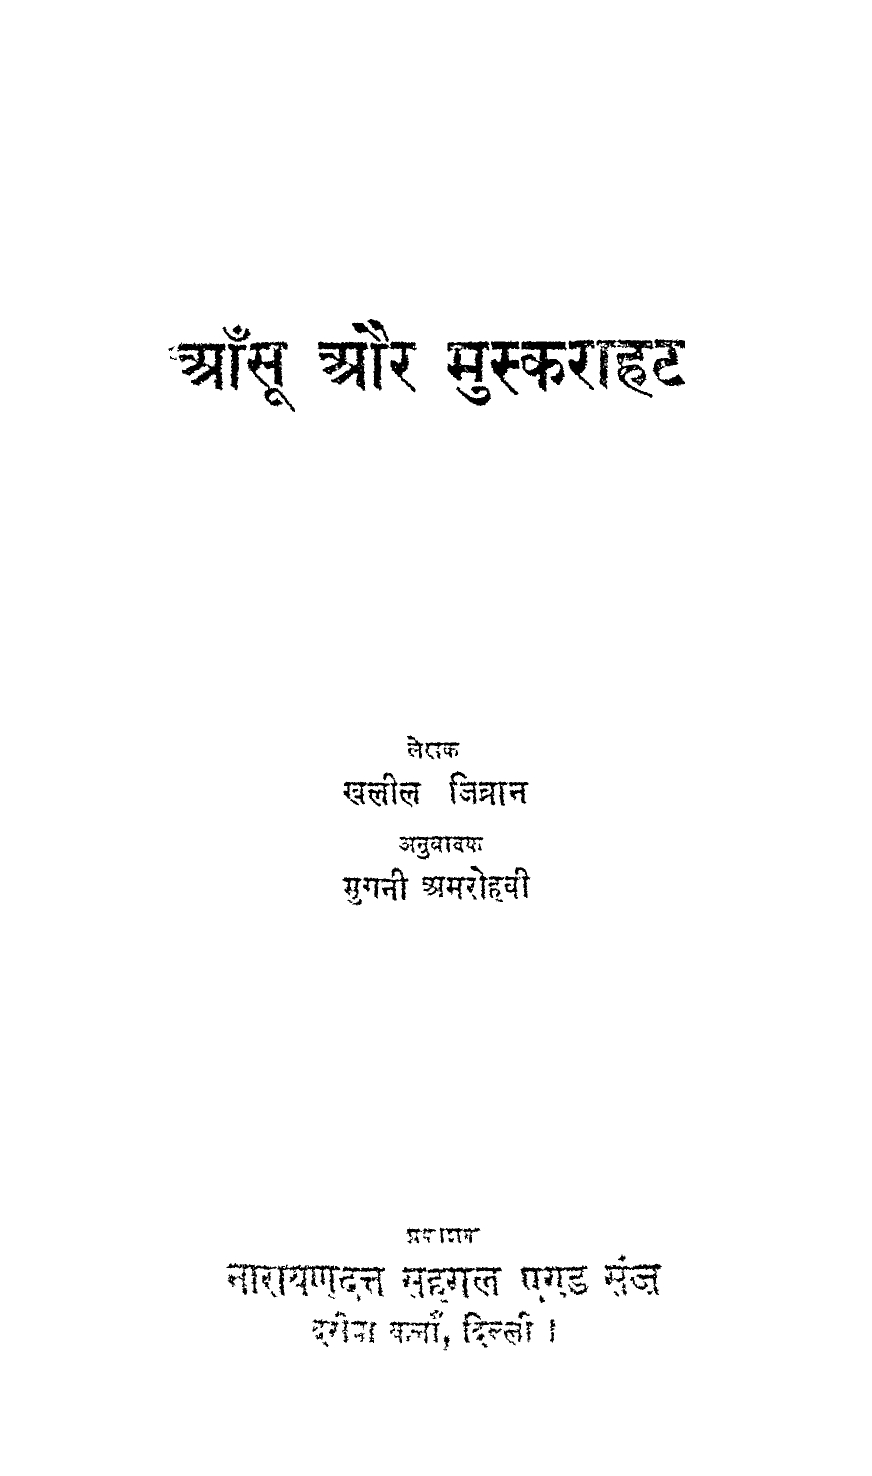 K. Gibran, Aansoo Aur Muskaan (a selection of stories translated into Hindi), [publication date unknown].